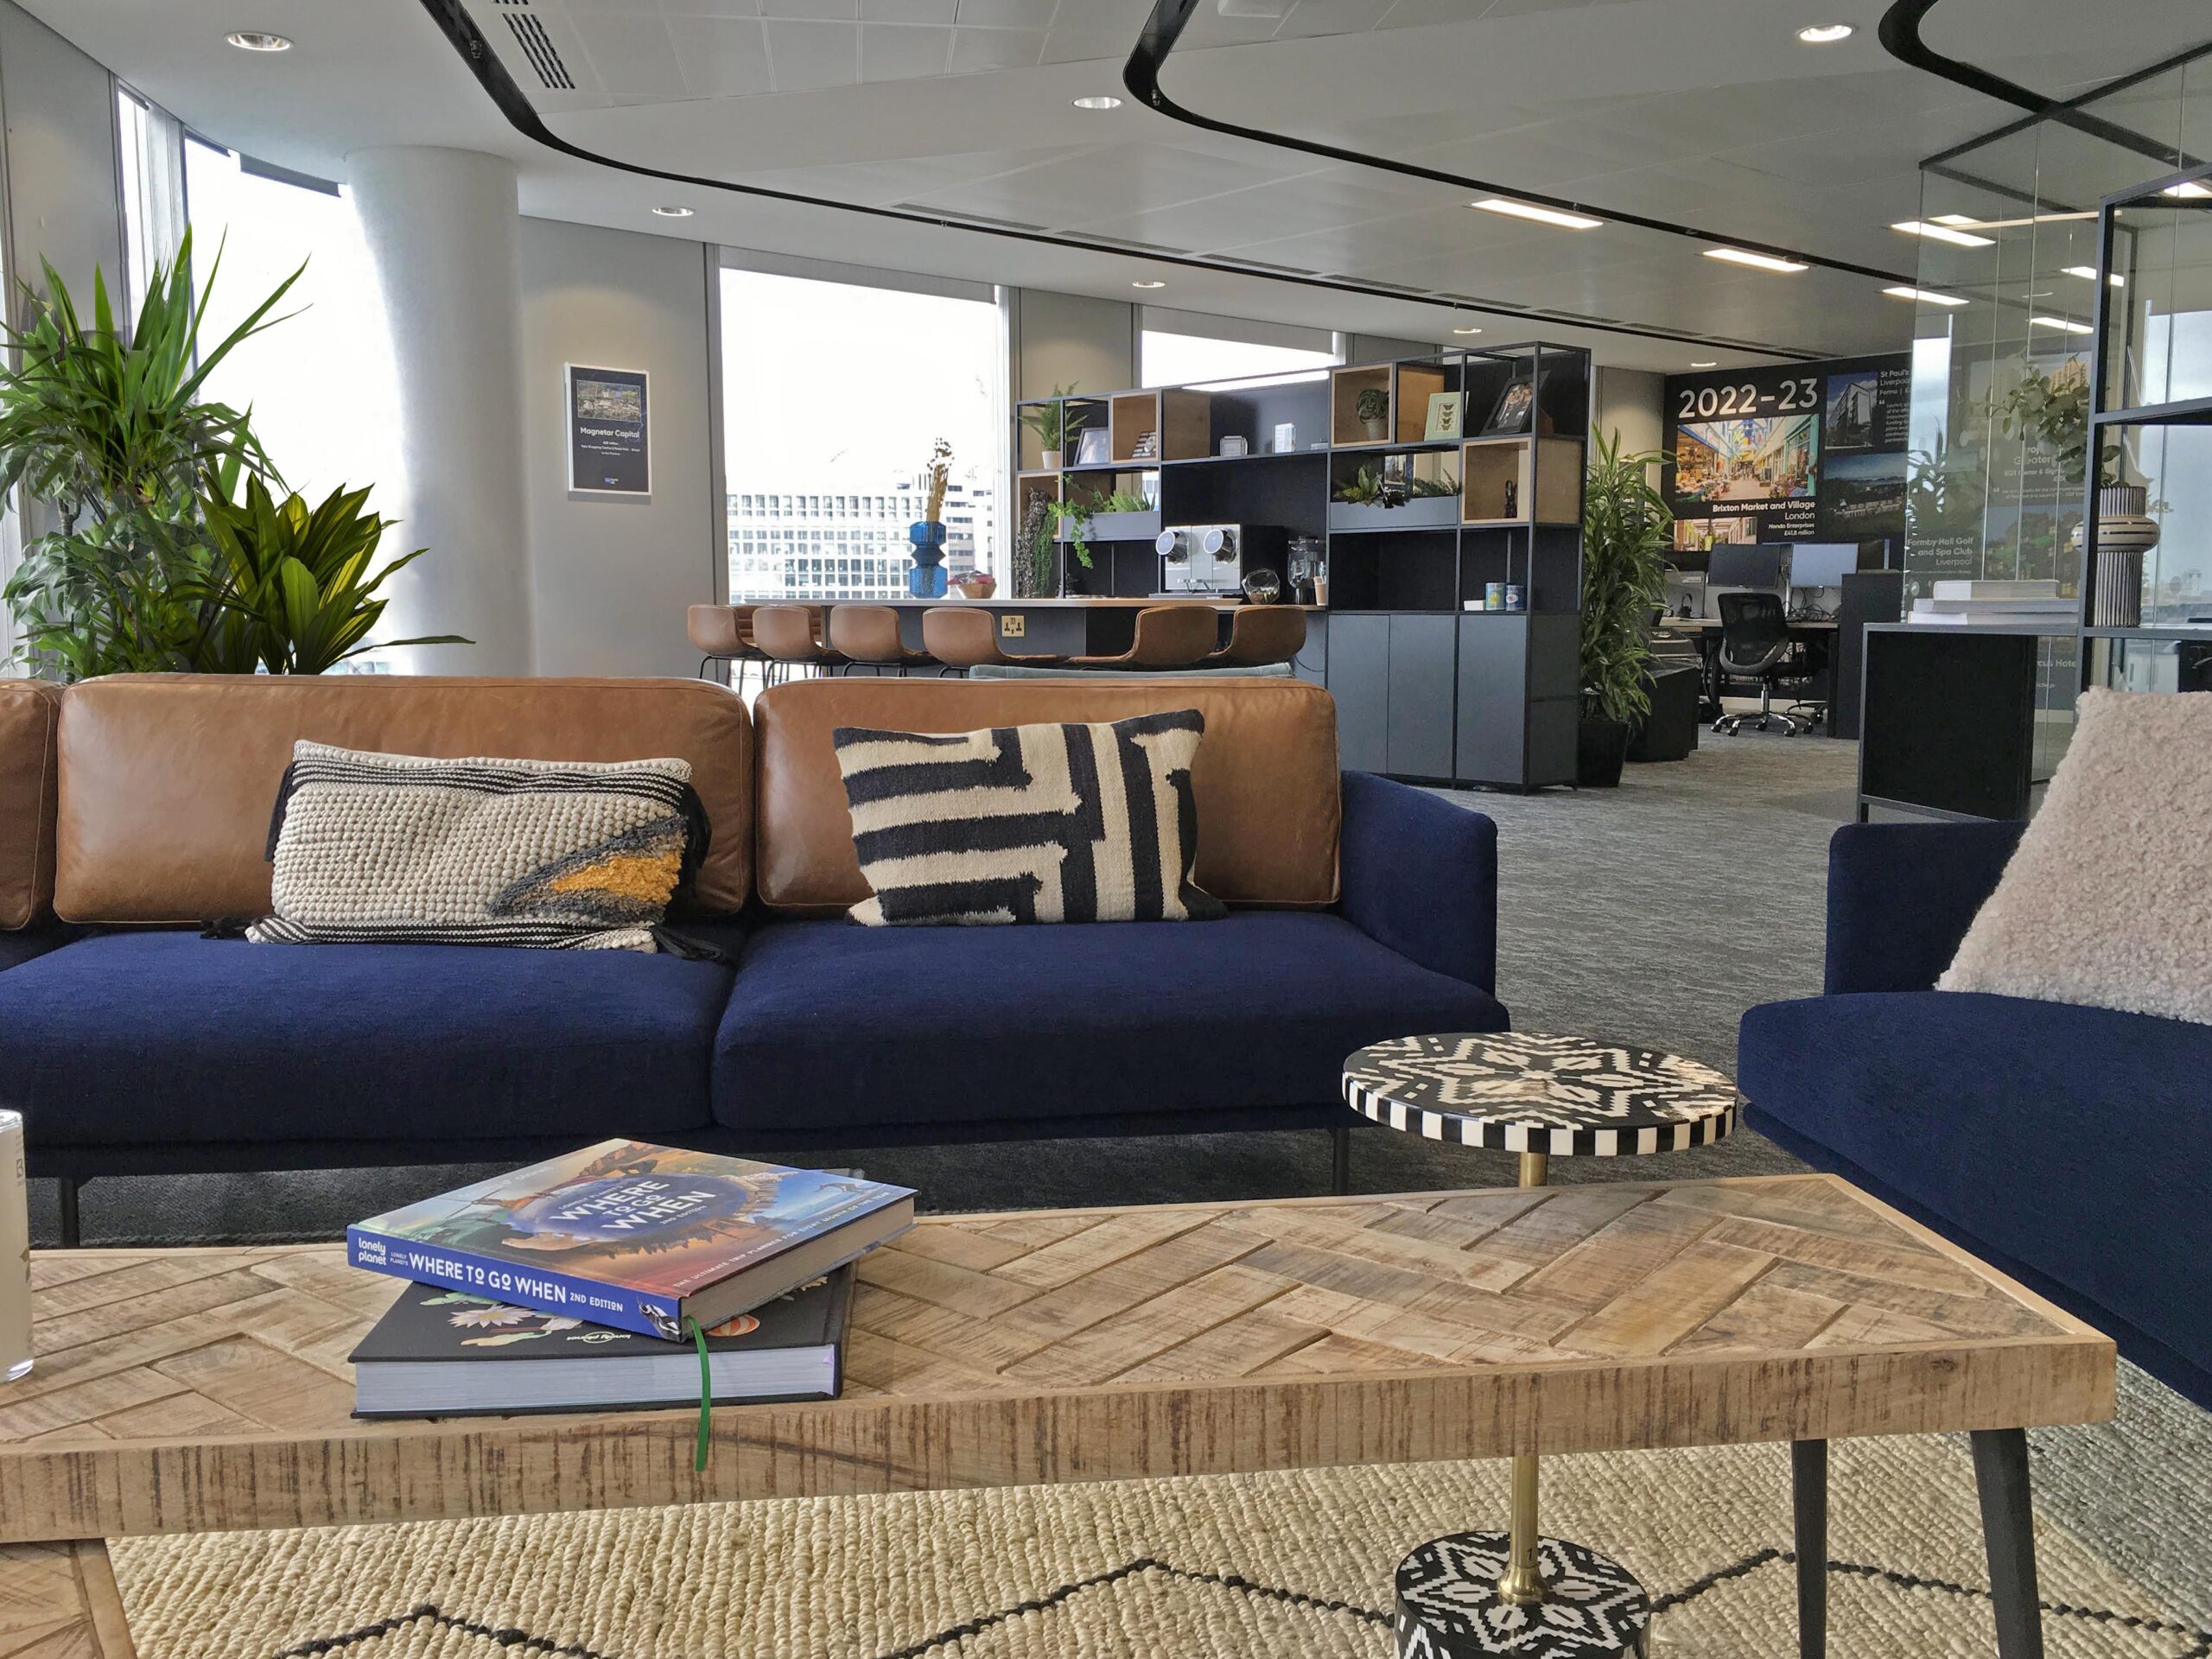 Sofa Surfing in the Office: Why Soft, Informal Meeting Spaces are Important